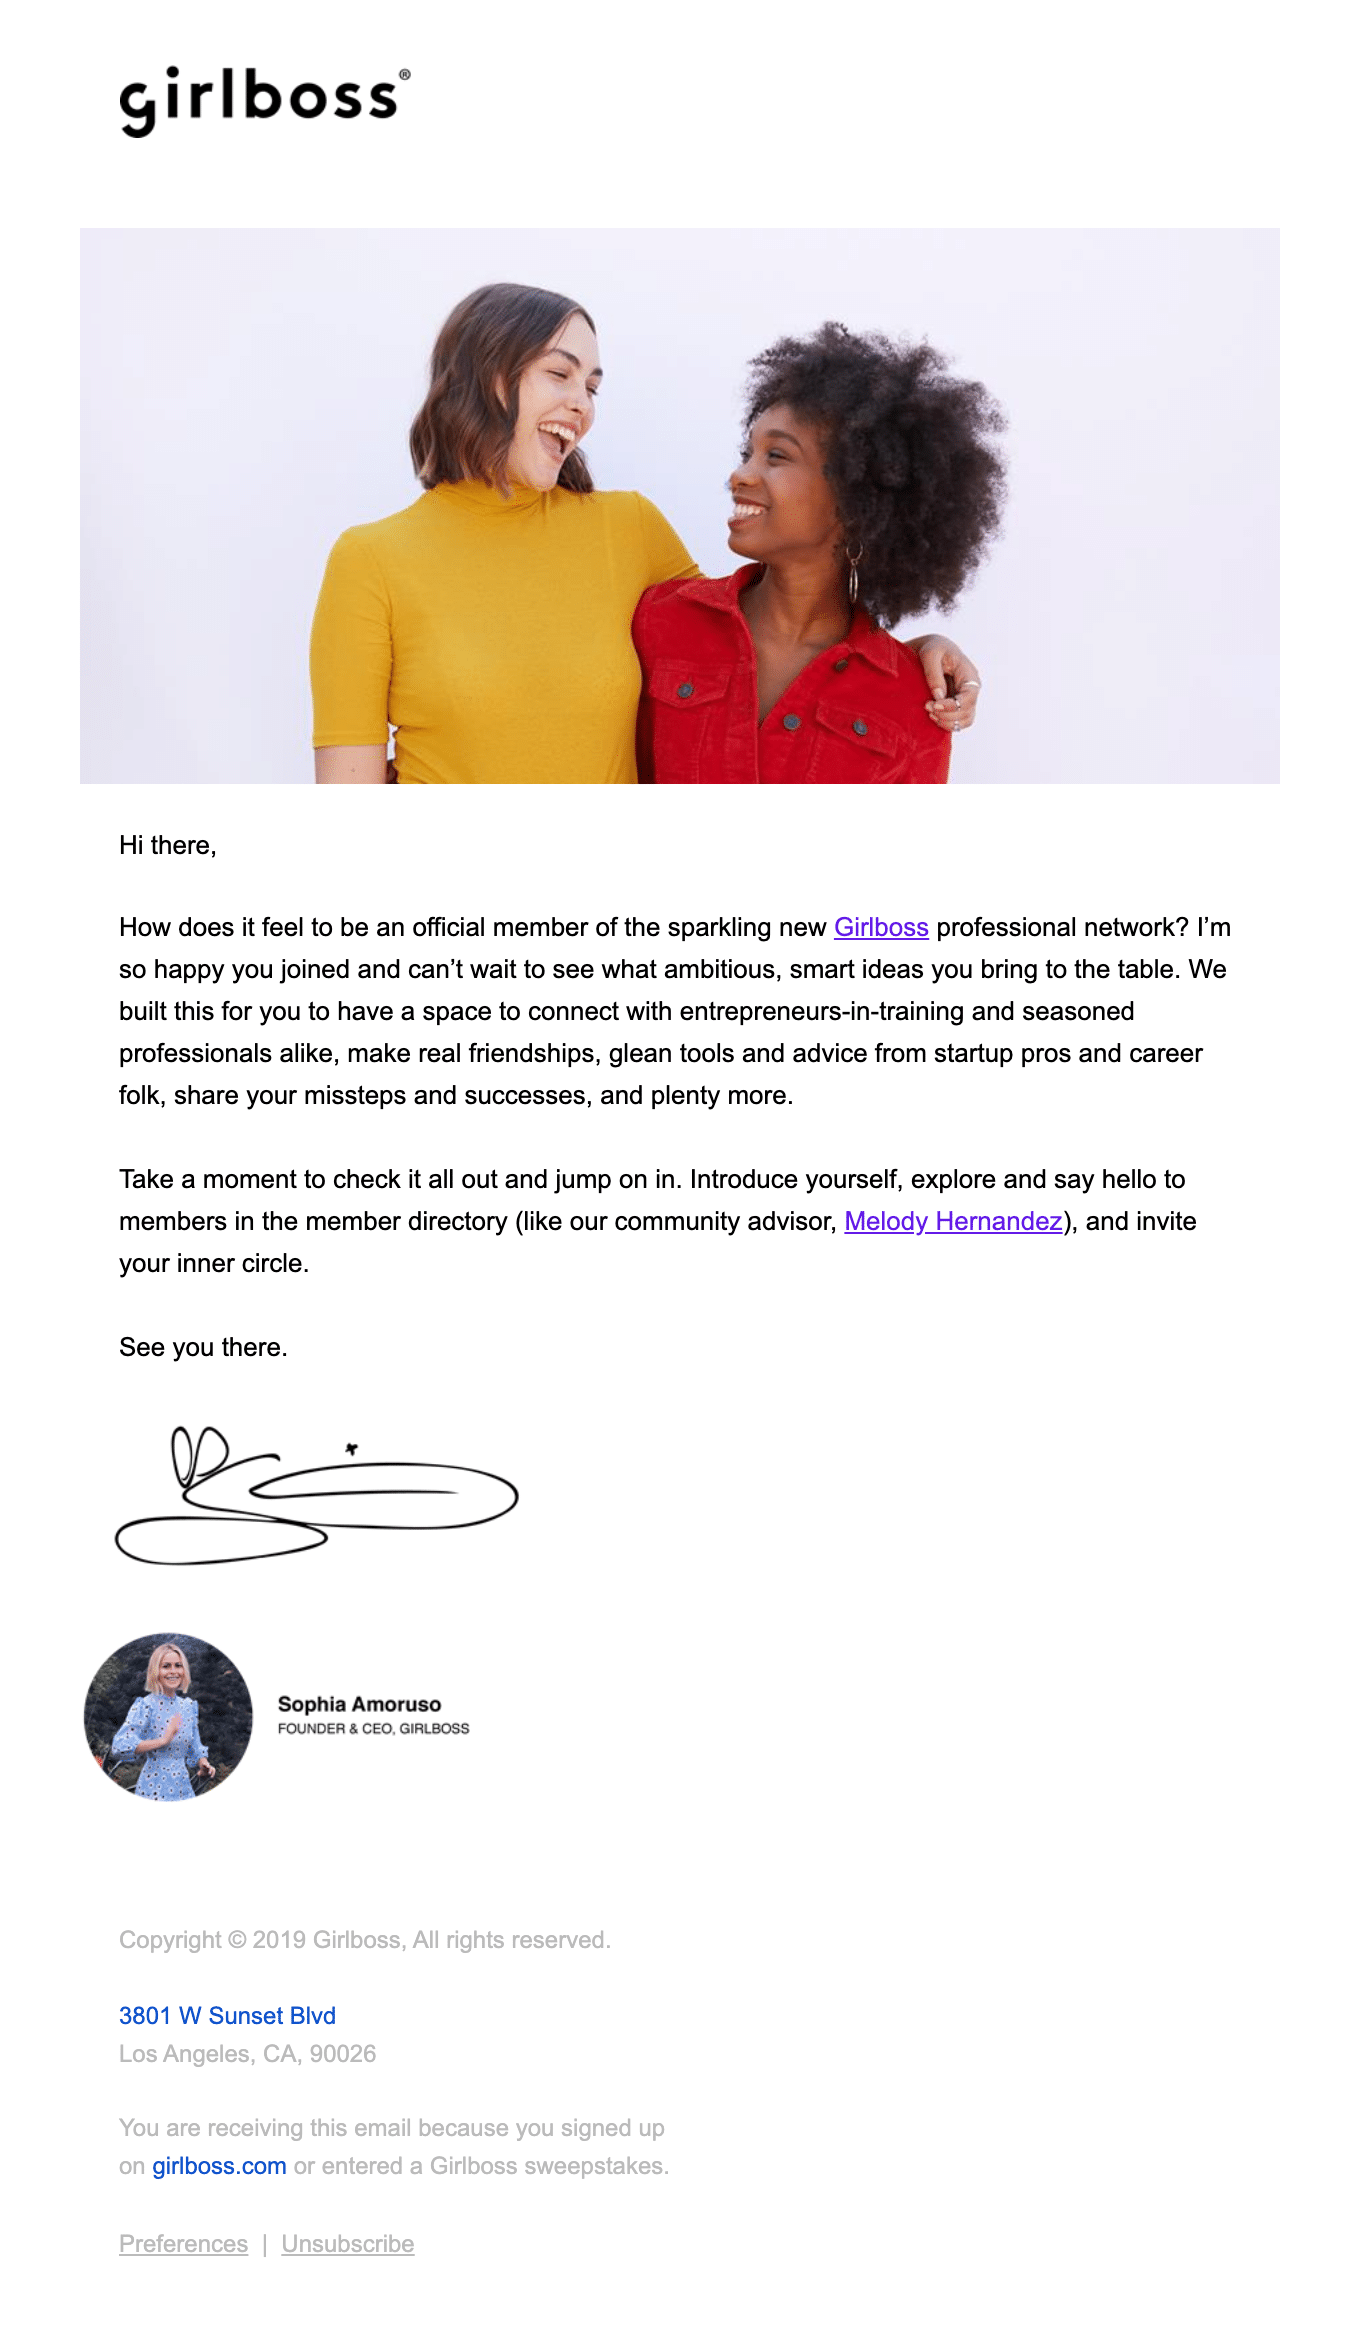 Girlboss sends a confirmation email with a note from its celebrity founder.